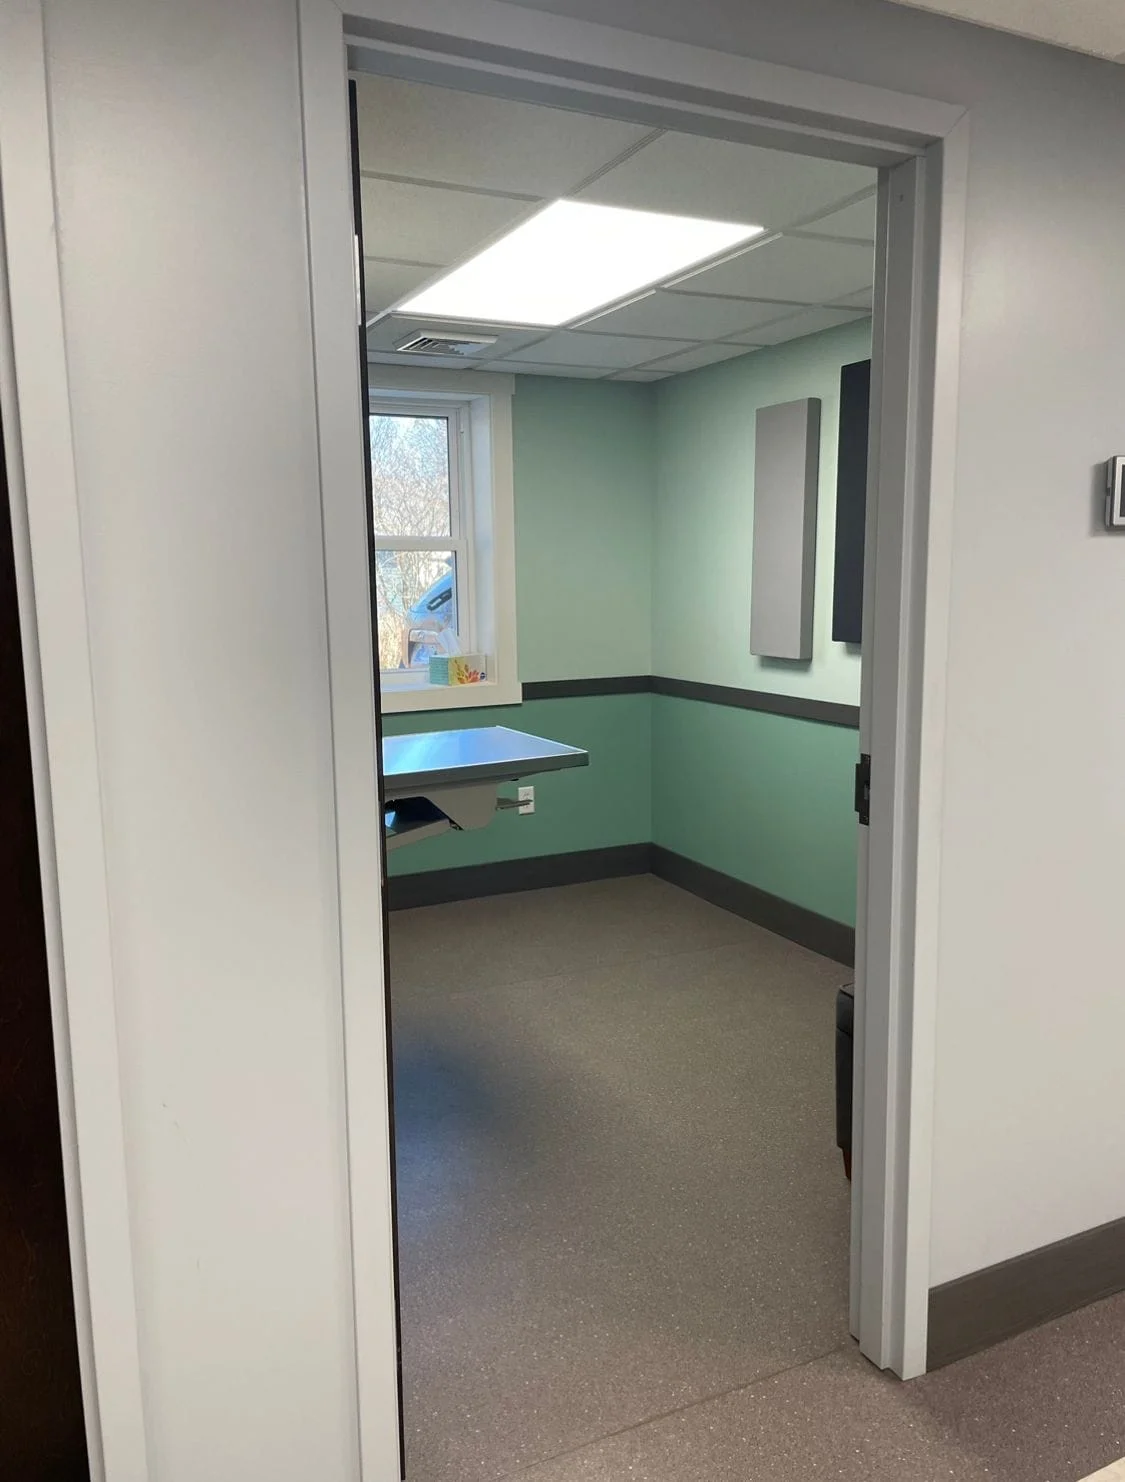 One of 2 small exam rooms